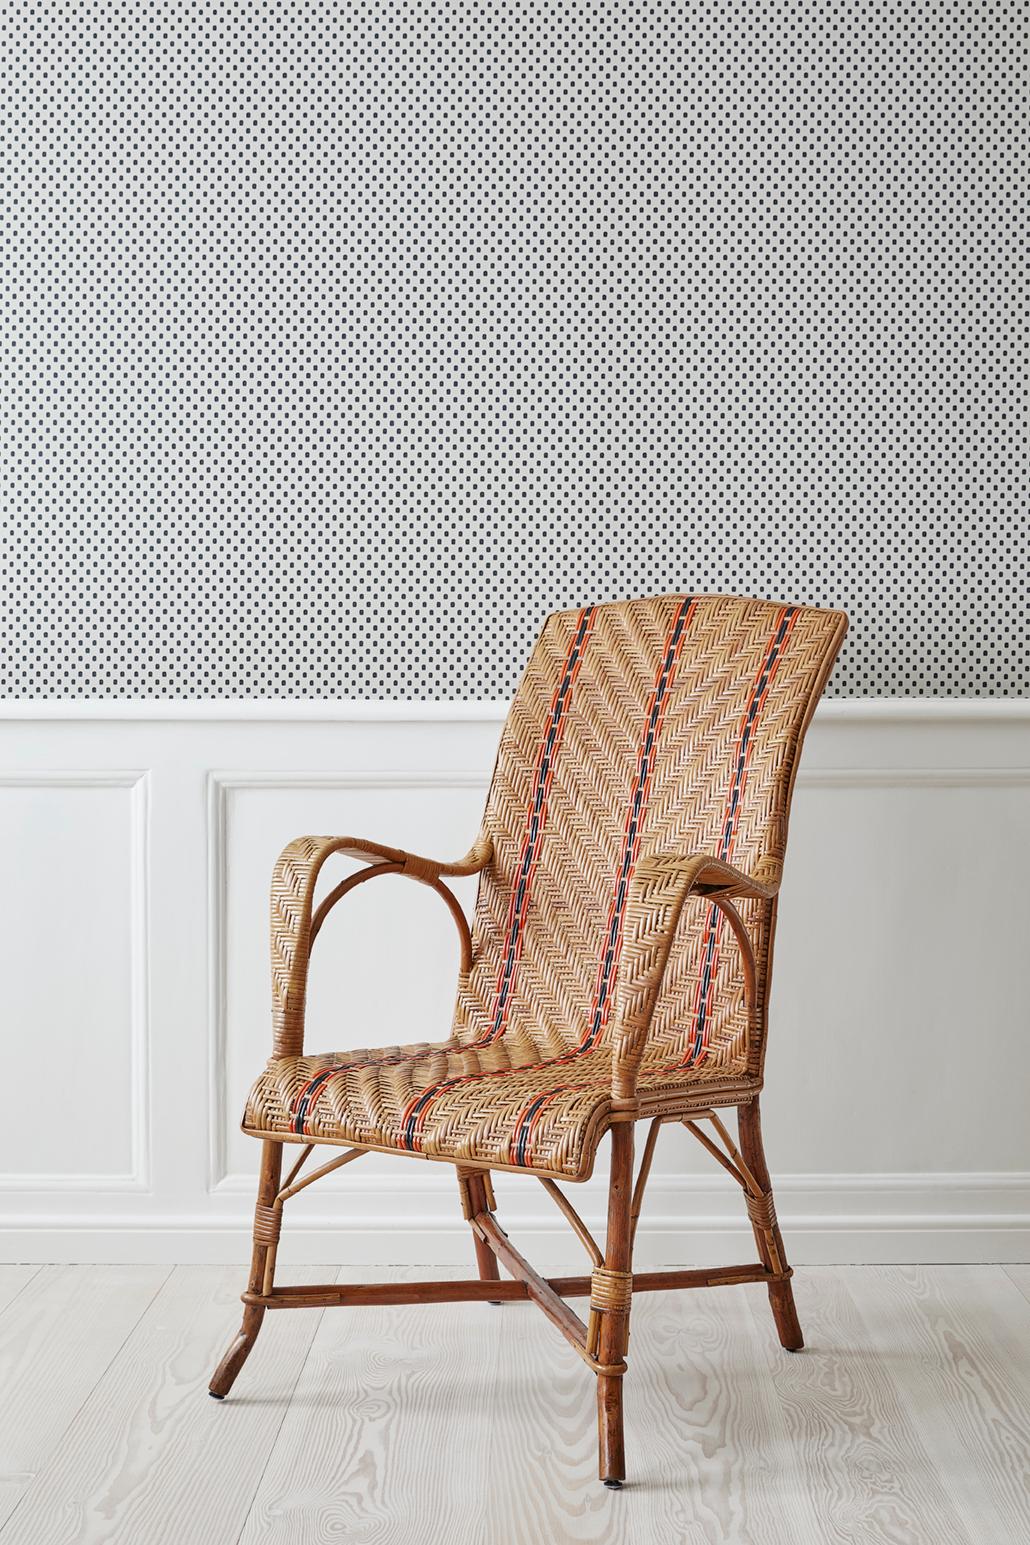 Lovely vintage fauteuil, rattan armchair with orange stripes and woven details. Made in France during the 1930s. 
 